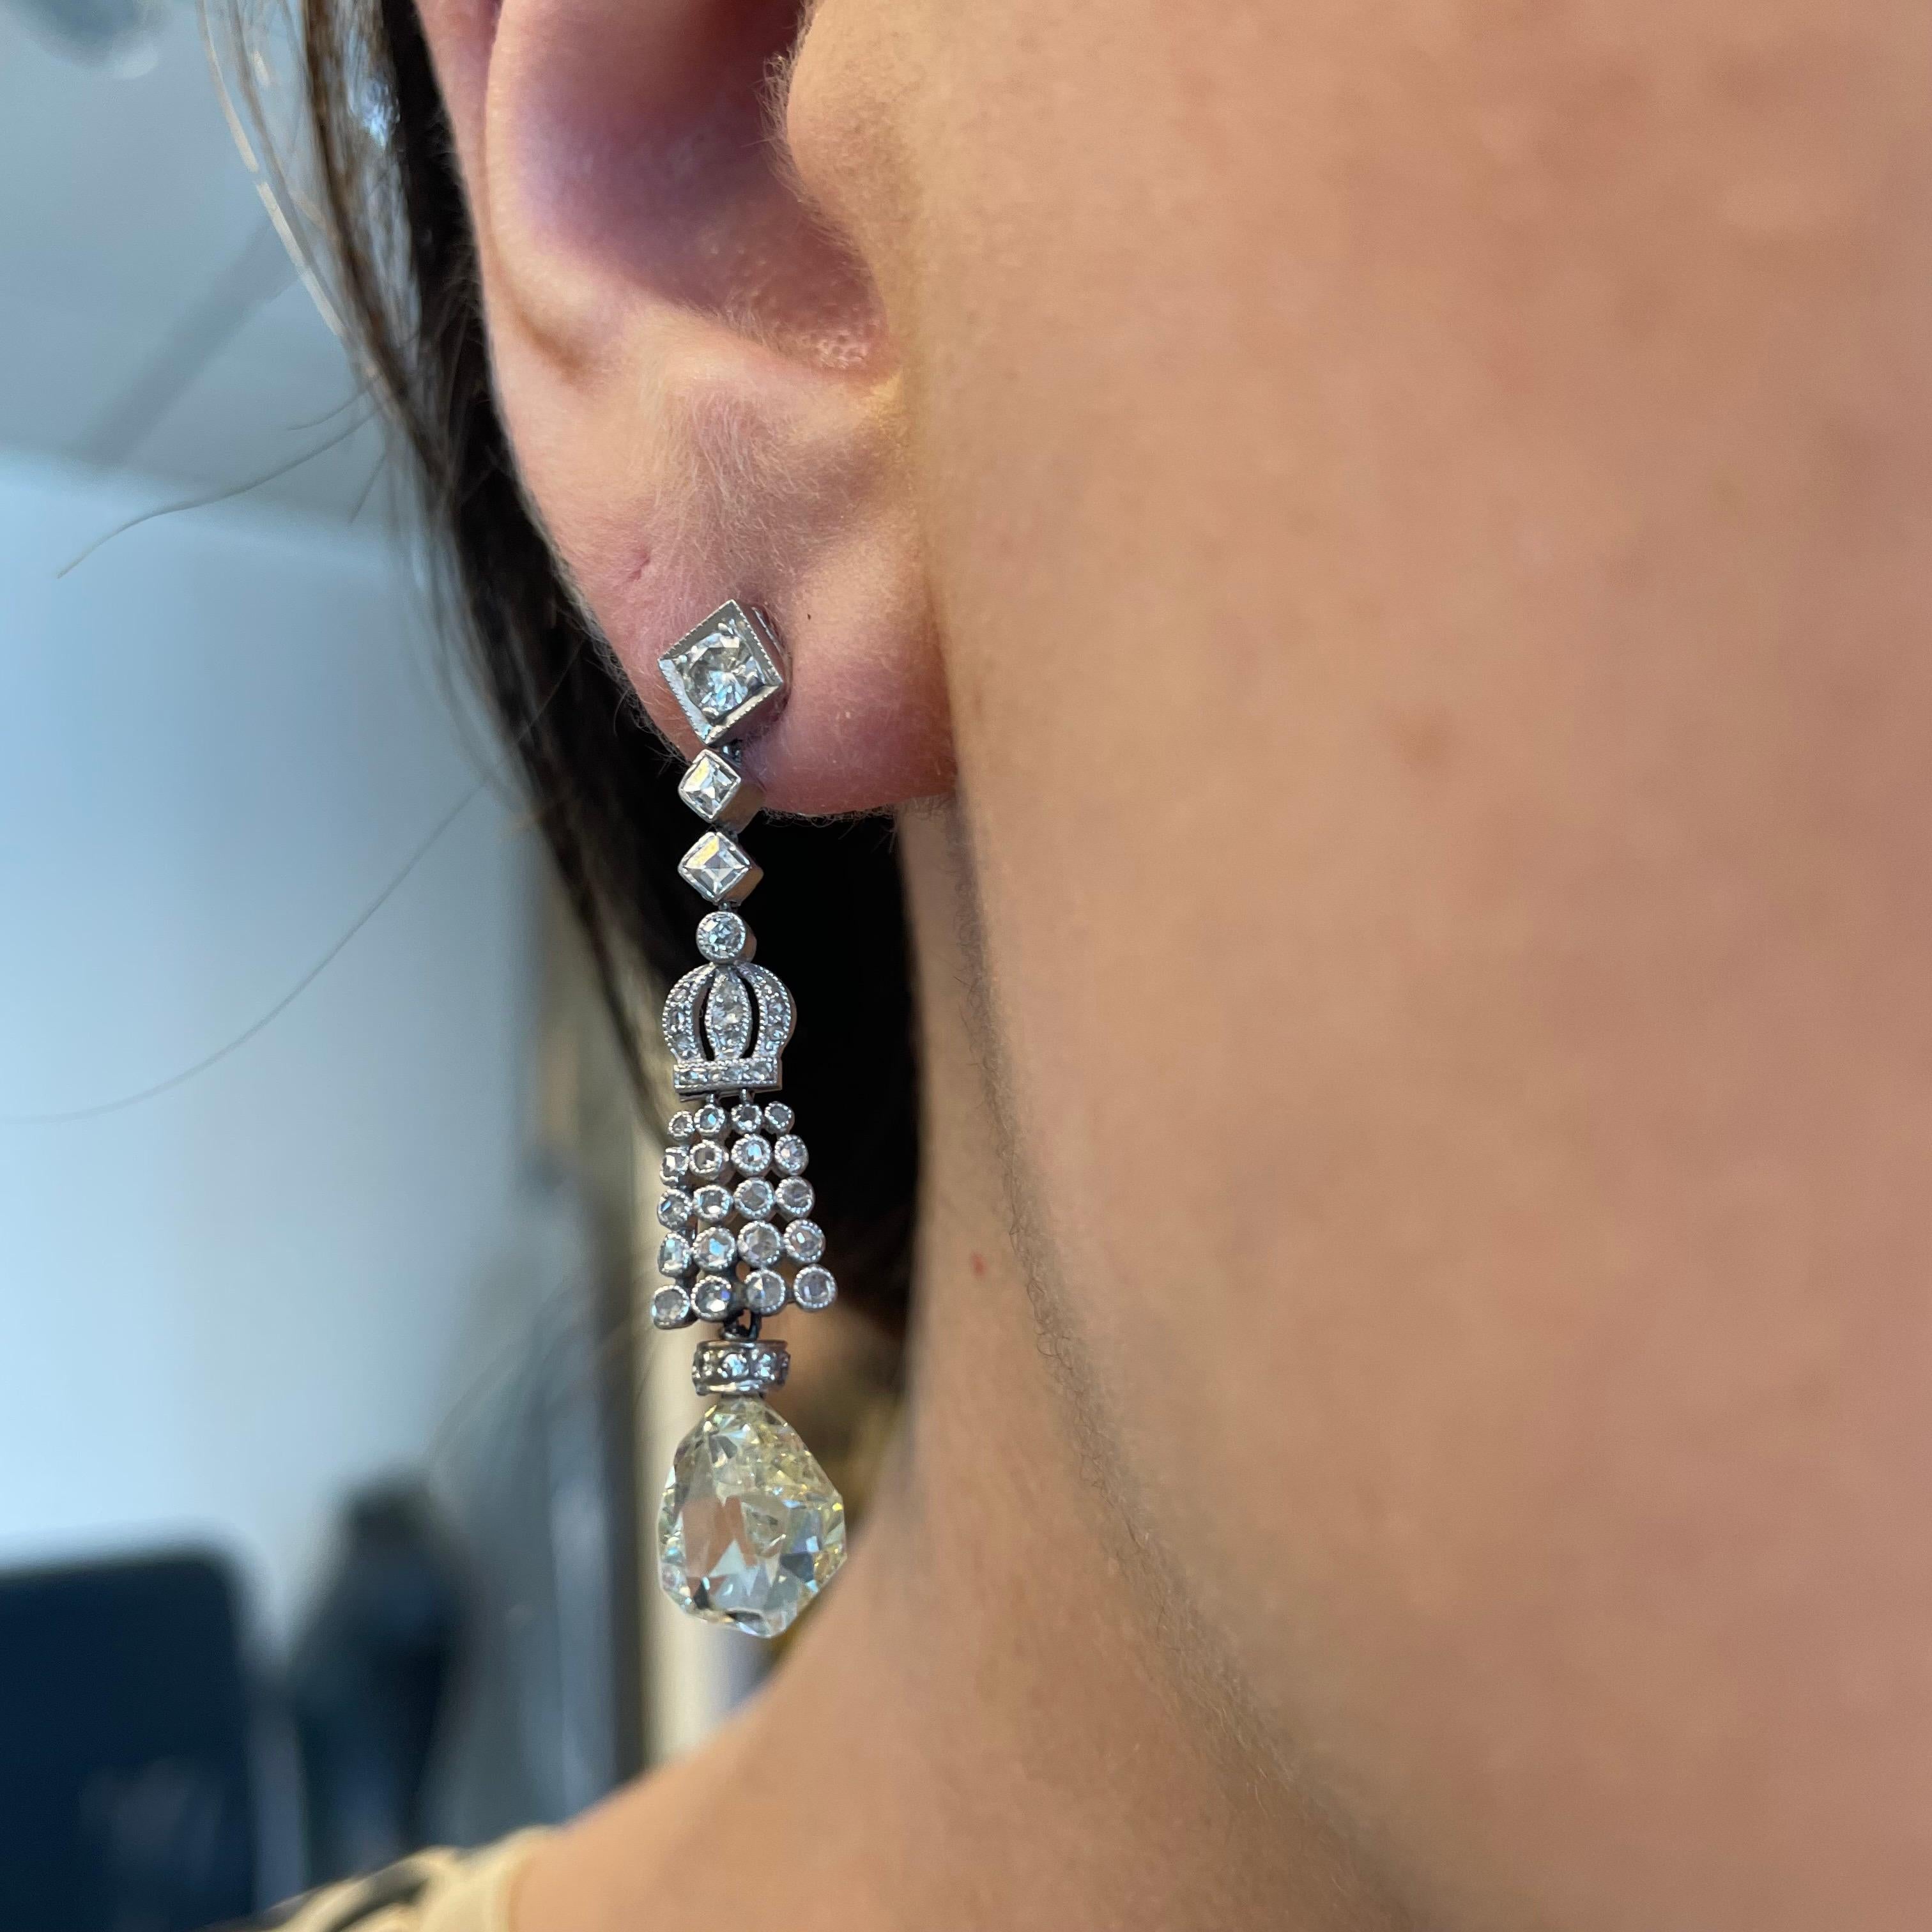 Edwardian inspired crown motif diamond earrings.
Center briollete diamonds complimented with round brilliant diamonds, 18k white gold. 
Accommodated with an up-to-date appraisal by a GIA G.G. once purchased, upon request. Please contact us with any